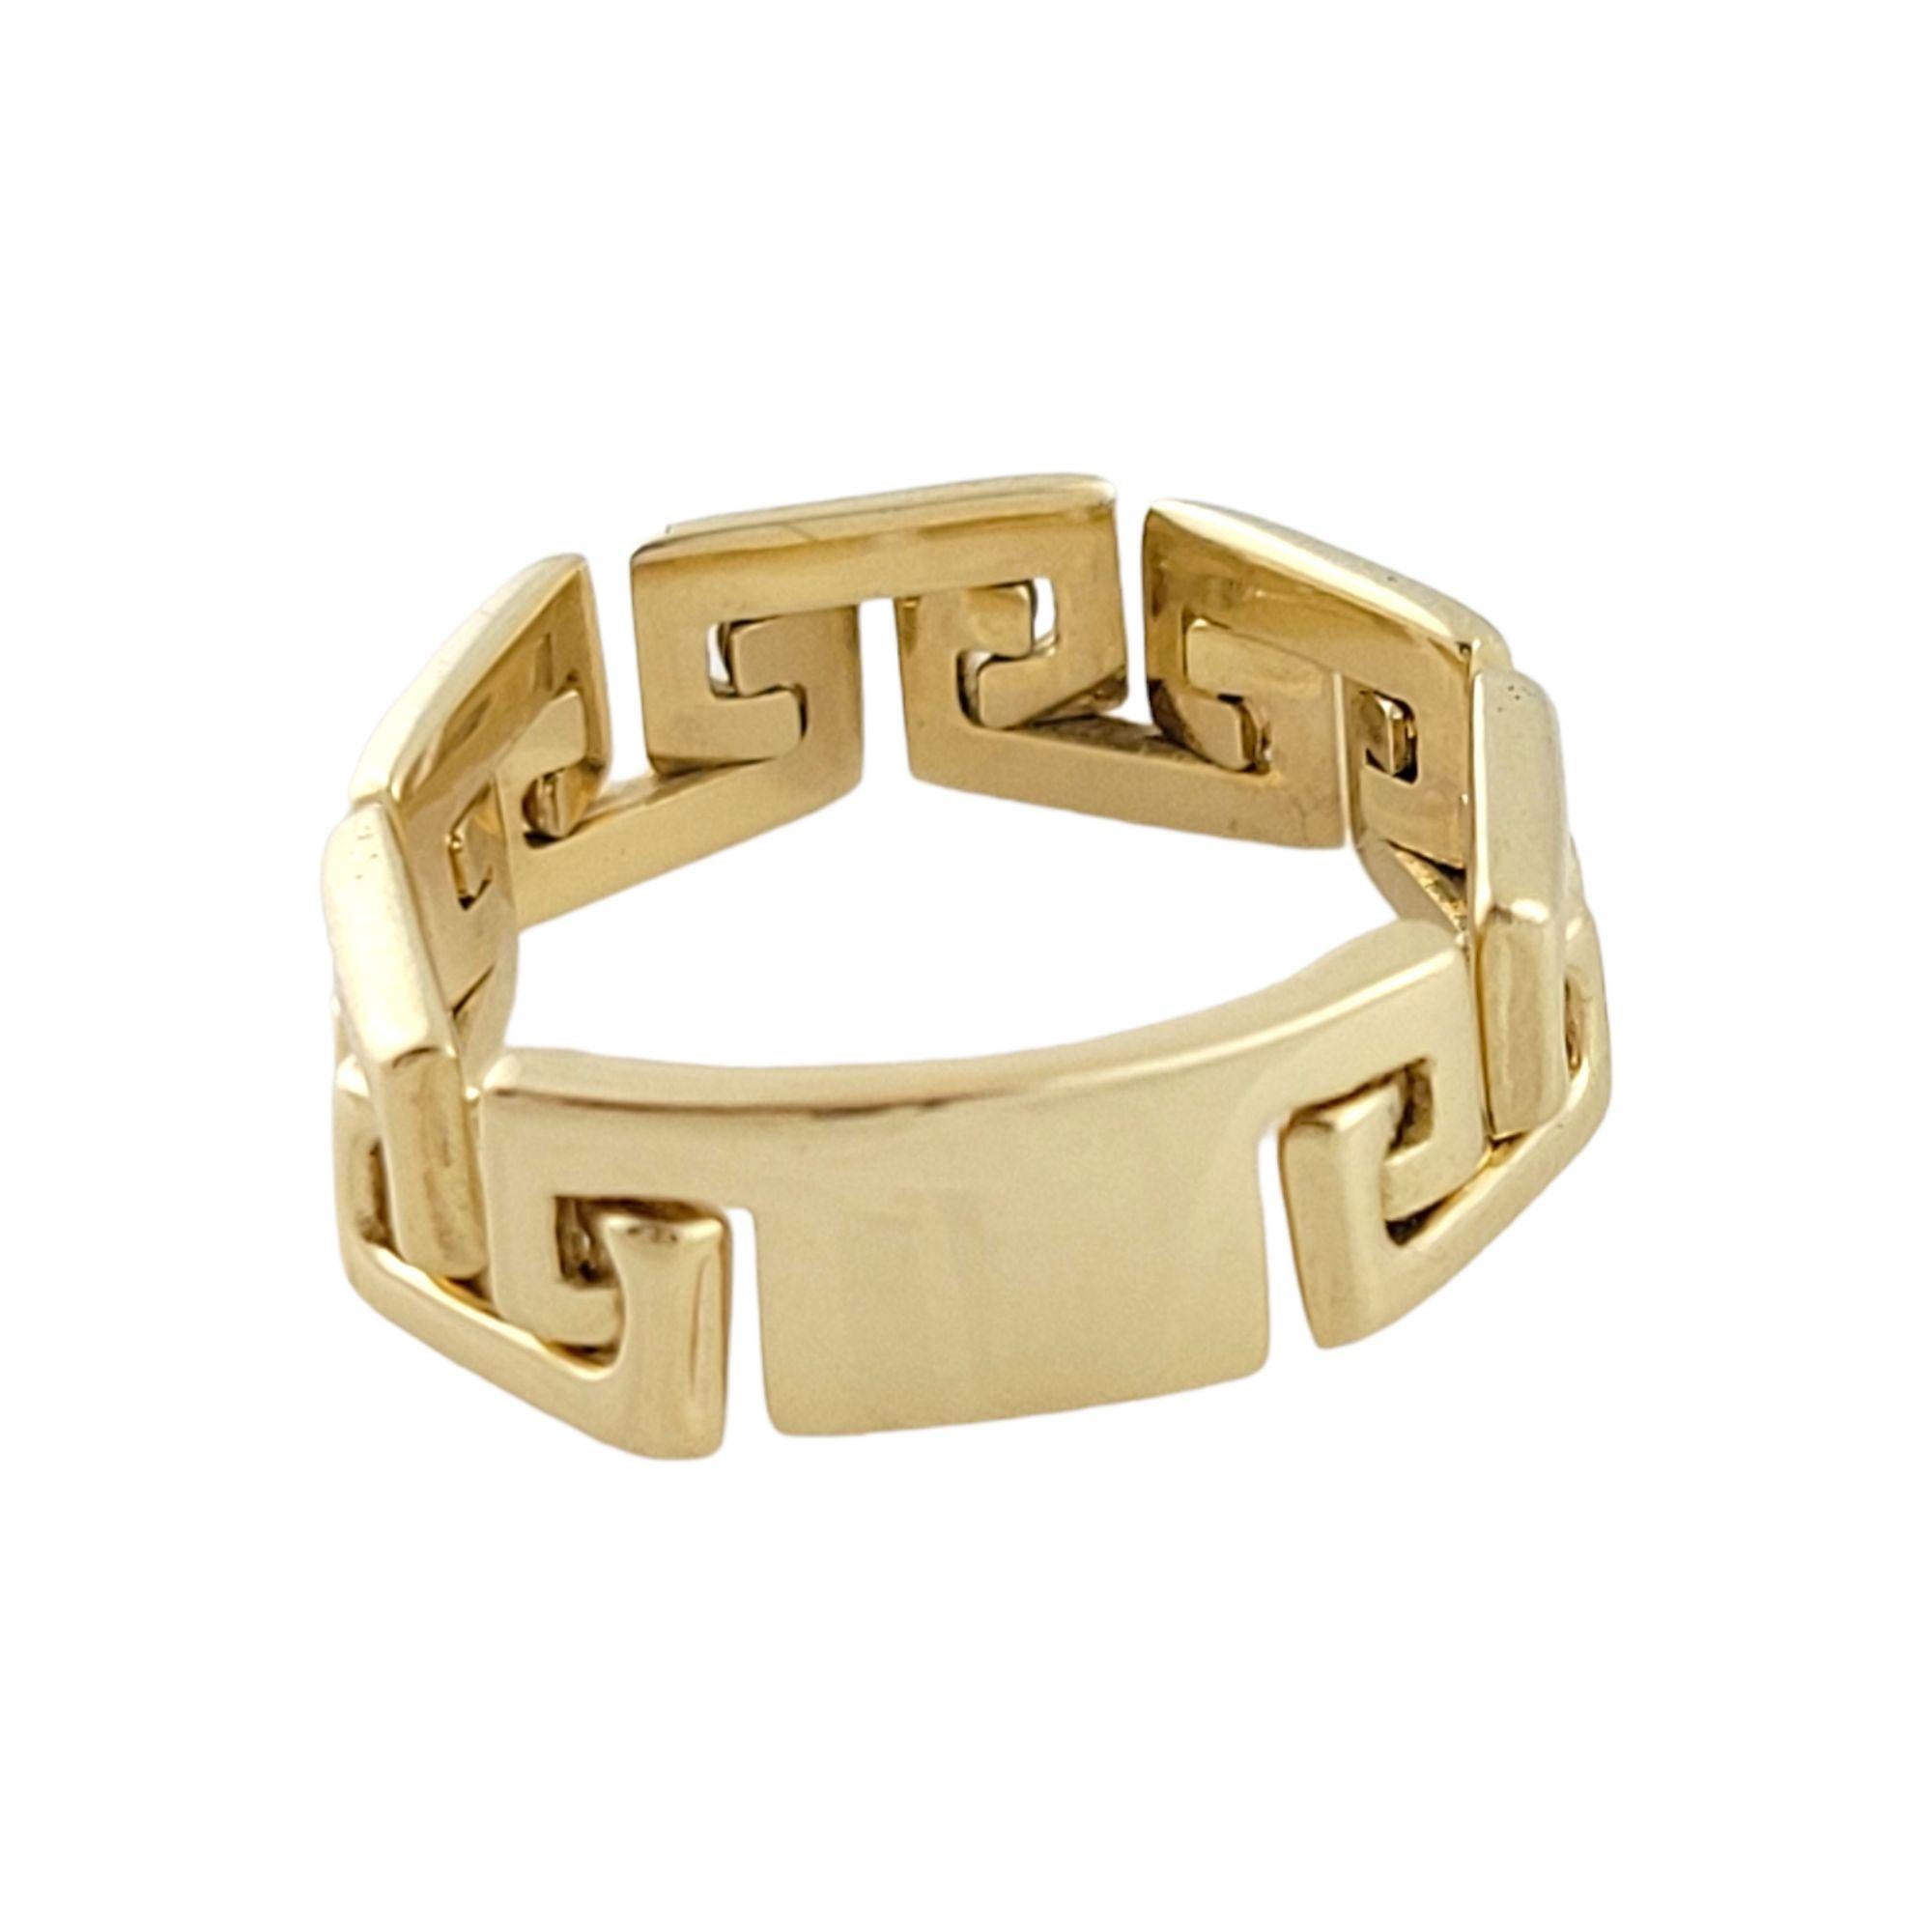 Vintage 14K Yellow Gold Tribal Link Ring Size 6.75

Beautiful tribal link ring made from 14K yellow gold!

Size: 6.75

Weight: 3.3 g/ 2.1 dwt

Hallmark: RCI 14K

Very good condition, professionally polished.

Will come packaged in a gift box or